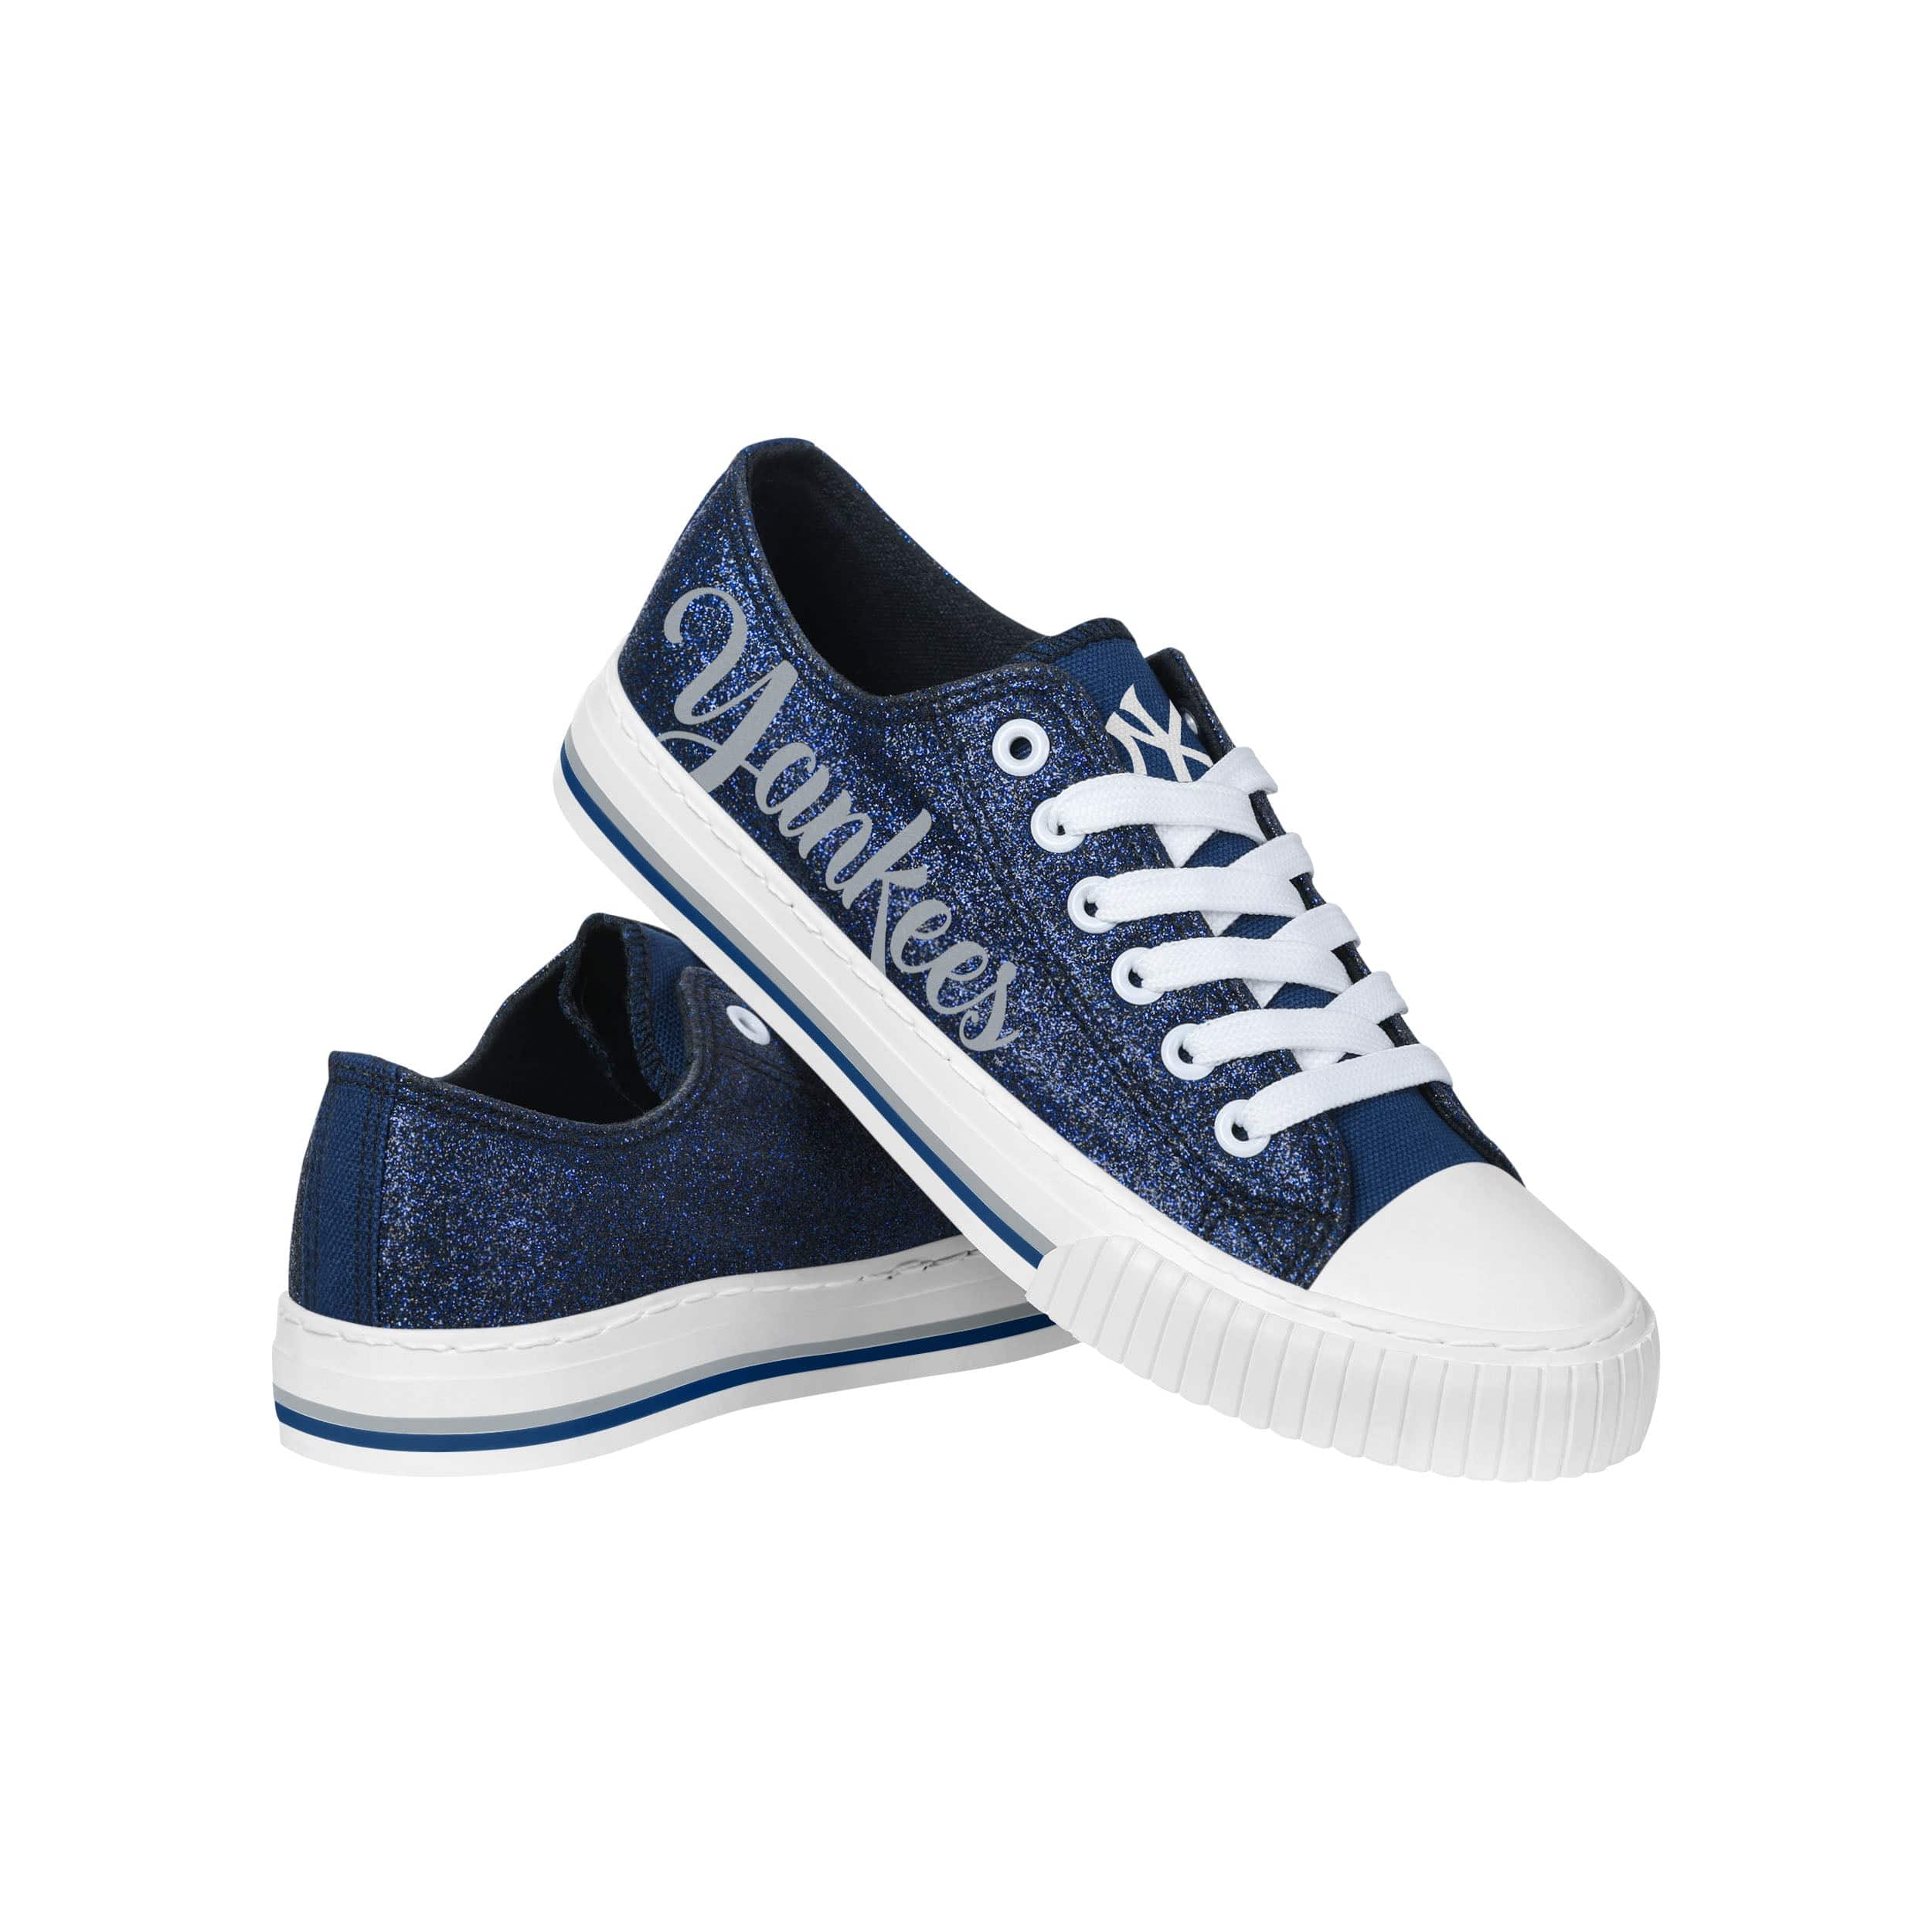 New York Yankees MLB Men And Women Color Glitter Canvas Shoes For Fans -  Banantees